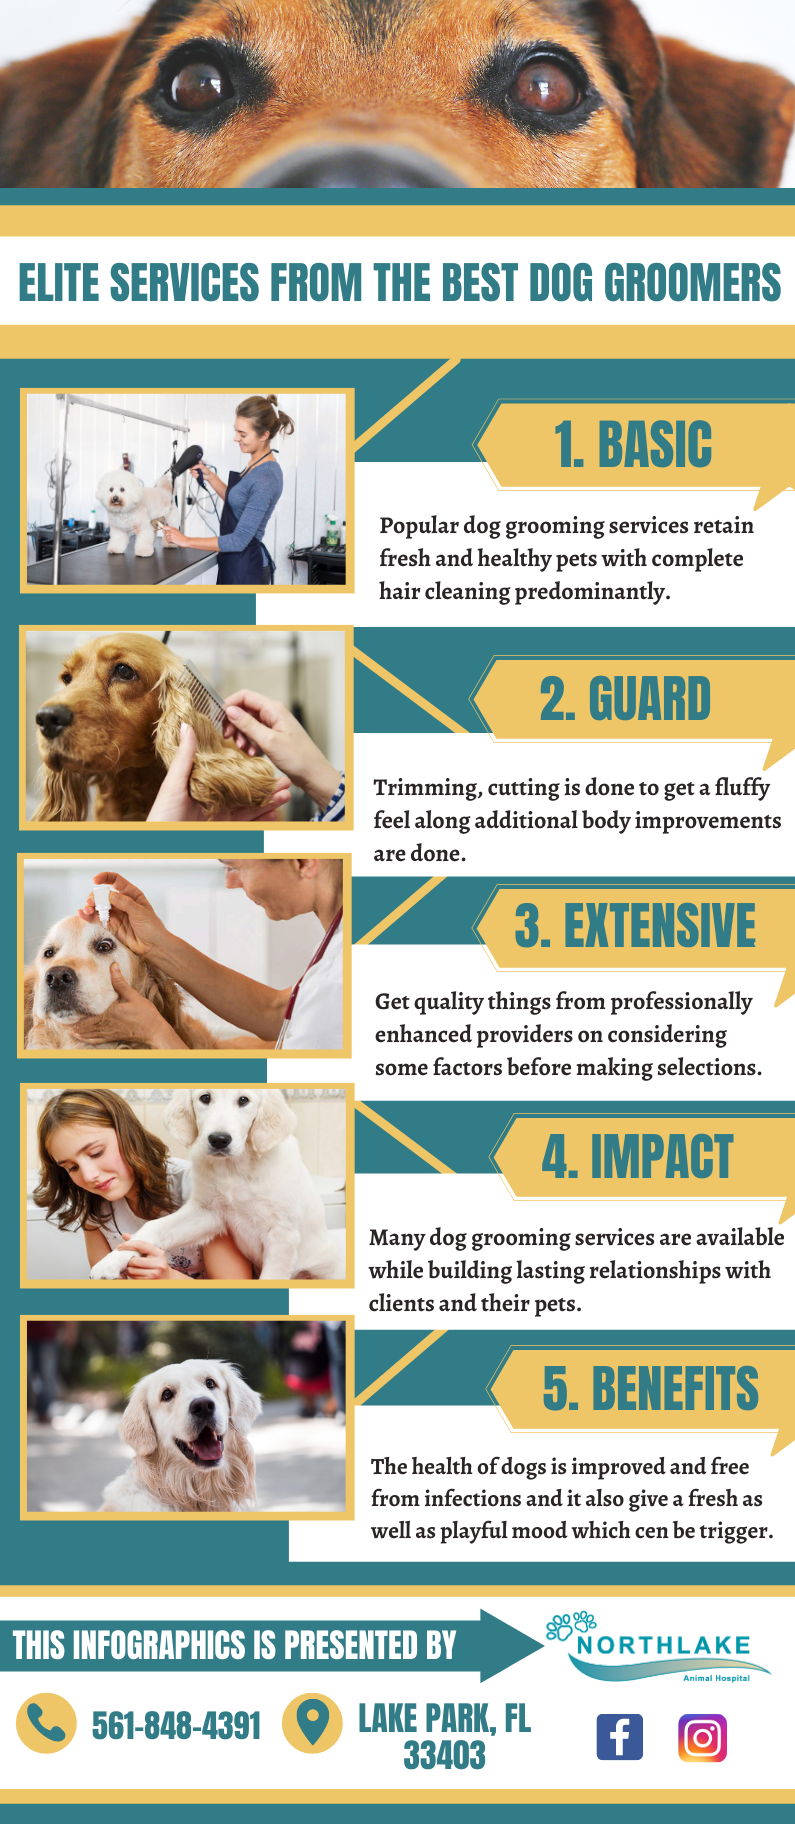 Dedicated Experts For Dog Grooming